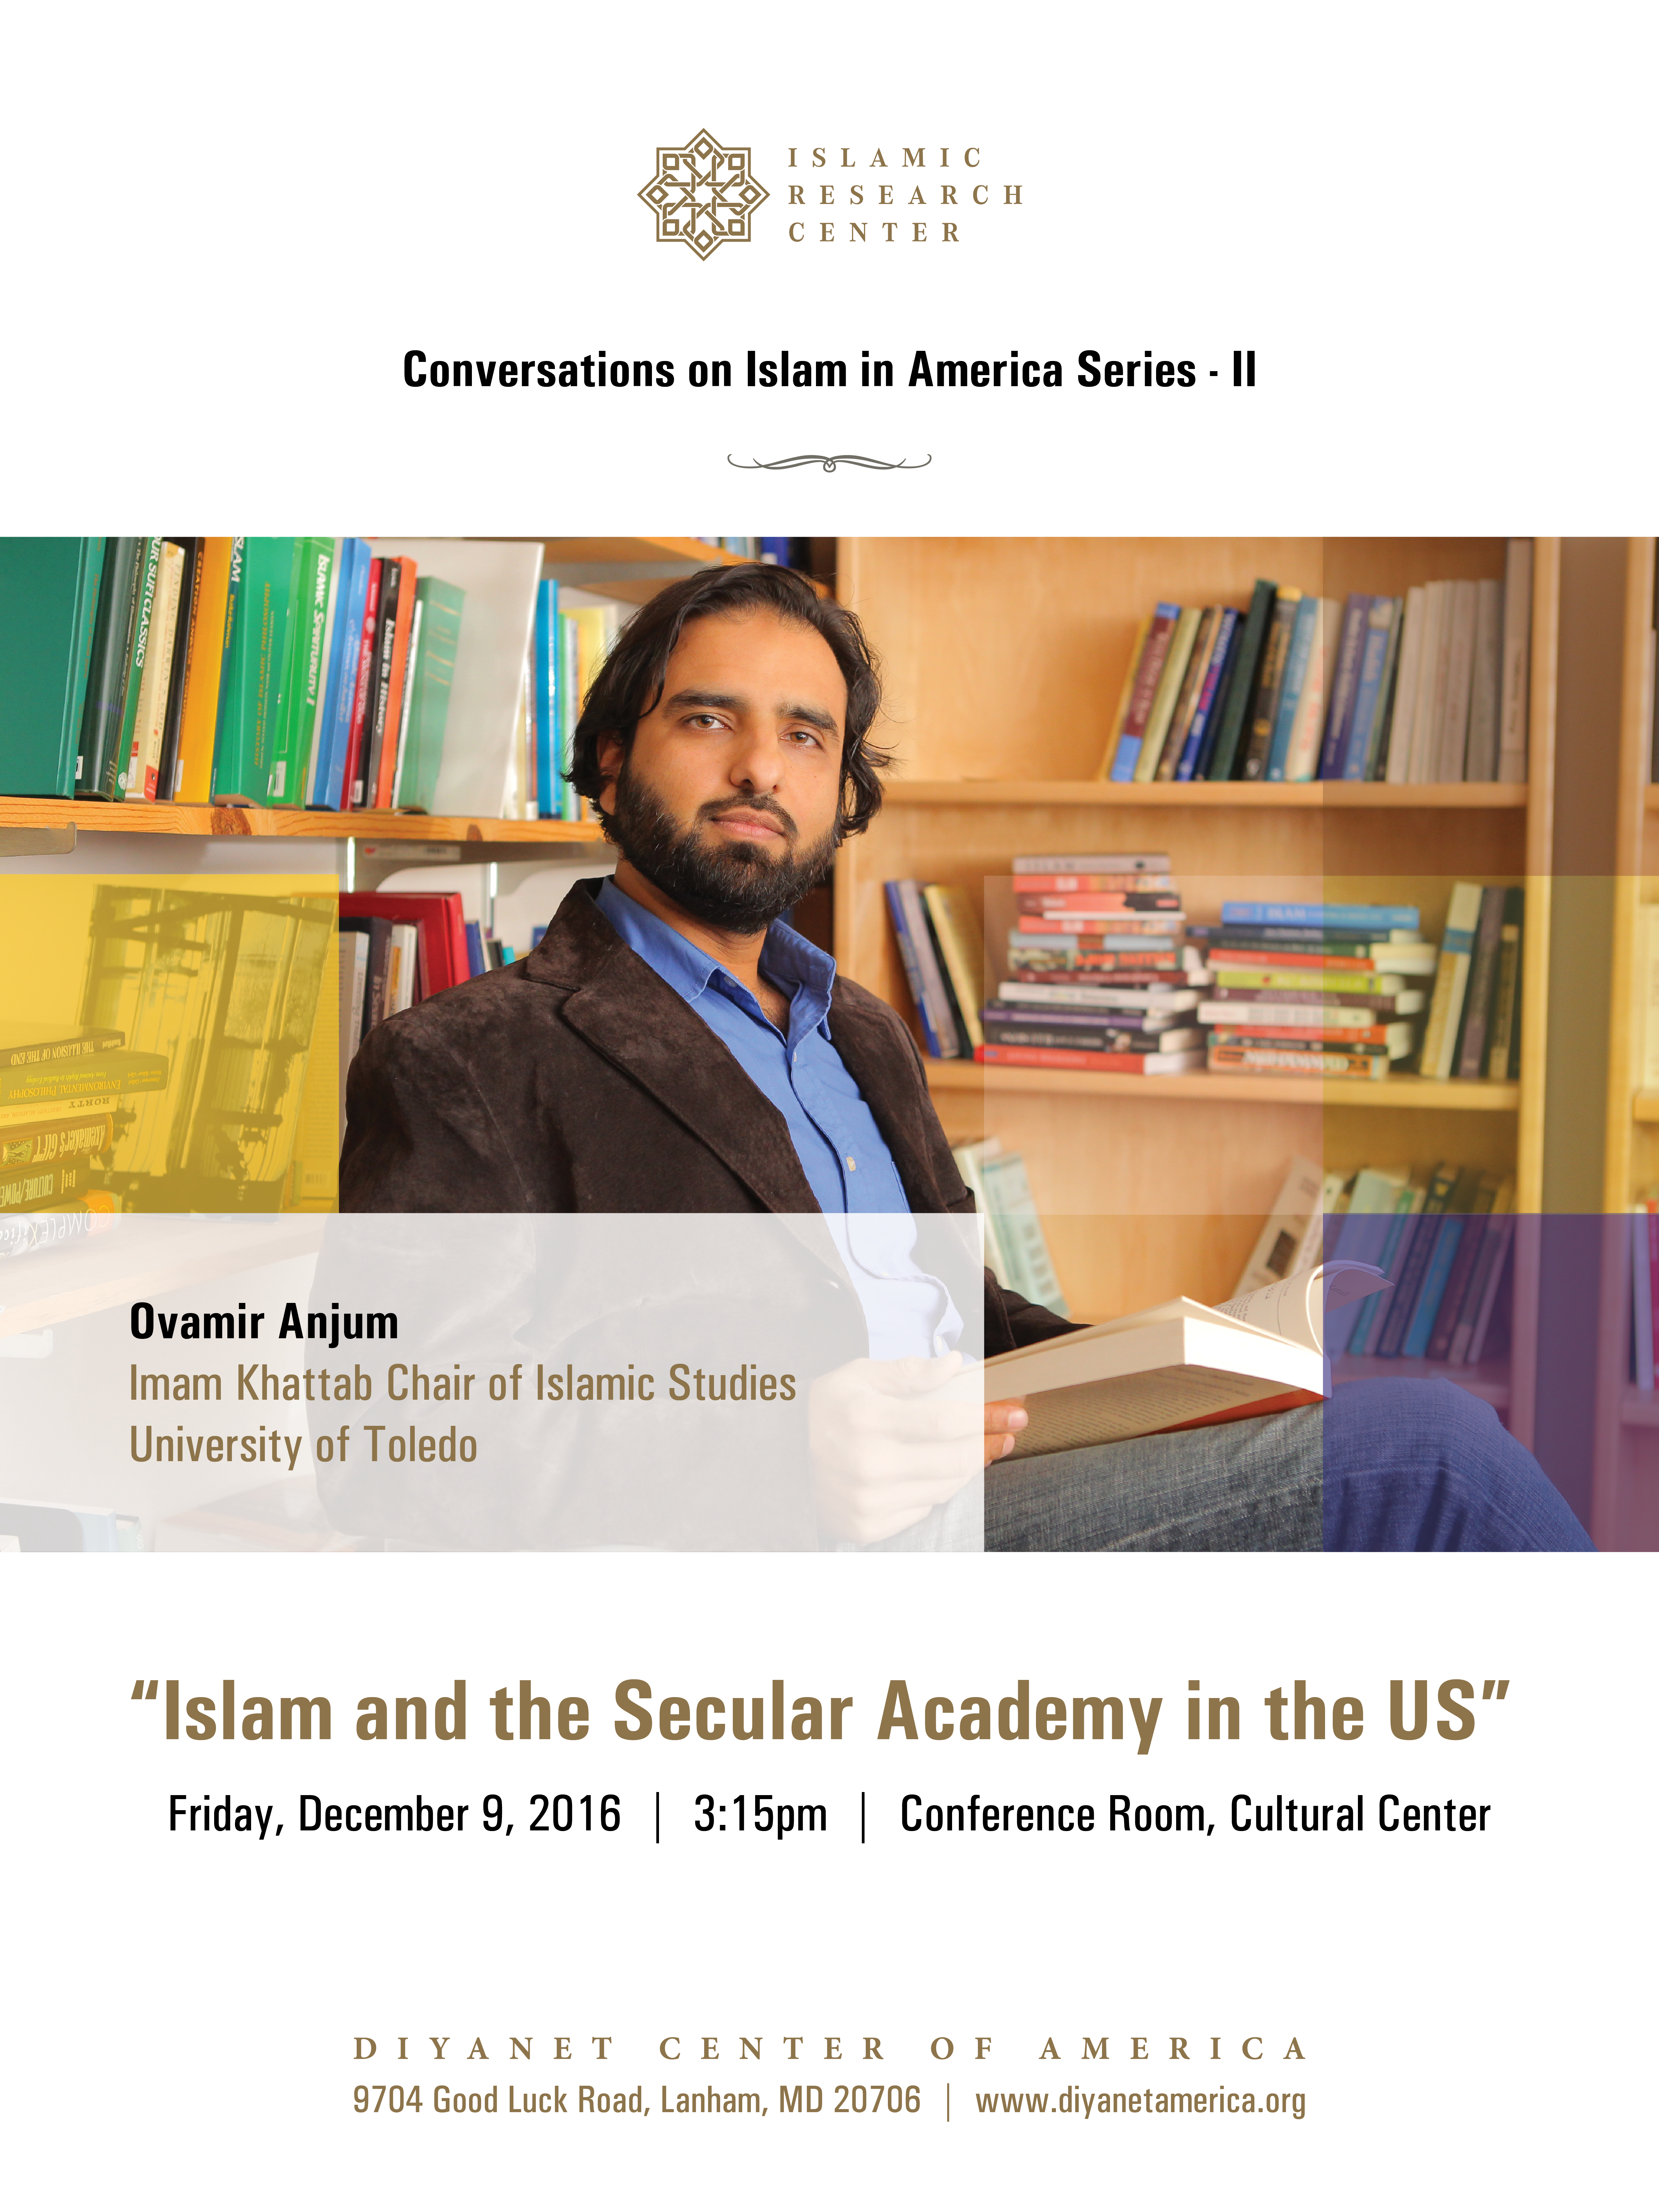 Conversations on Islam in America Series II – Islam and the Secular Academy in the US by Ovamir Anjum